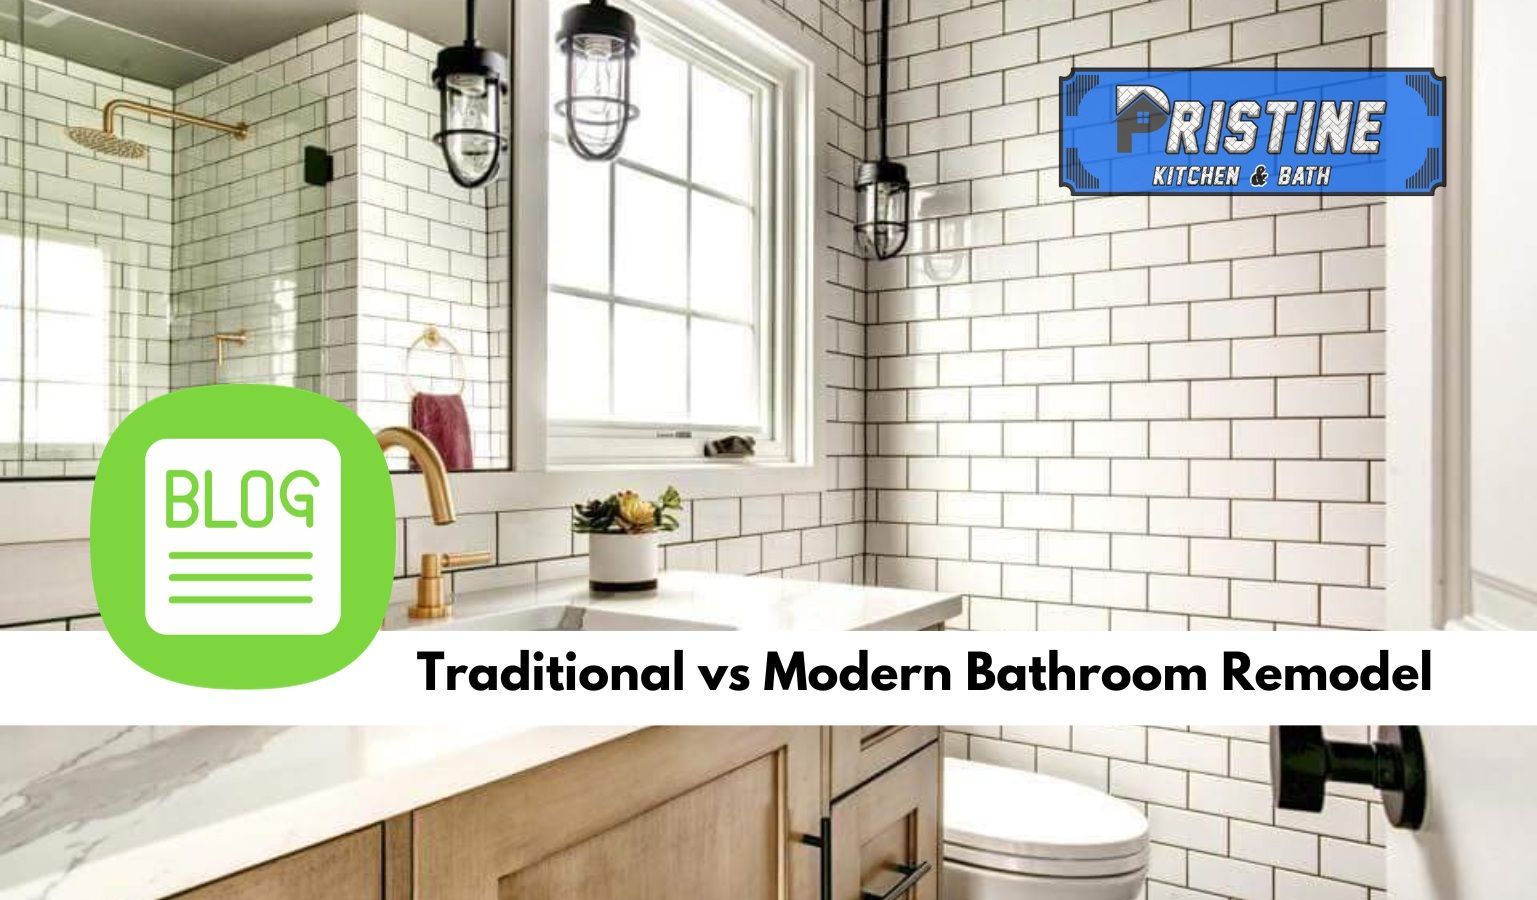 Bathroom Remodeler in Nampa discusses Modern vs Traditional Styles